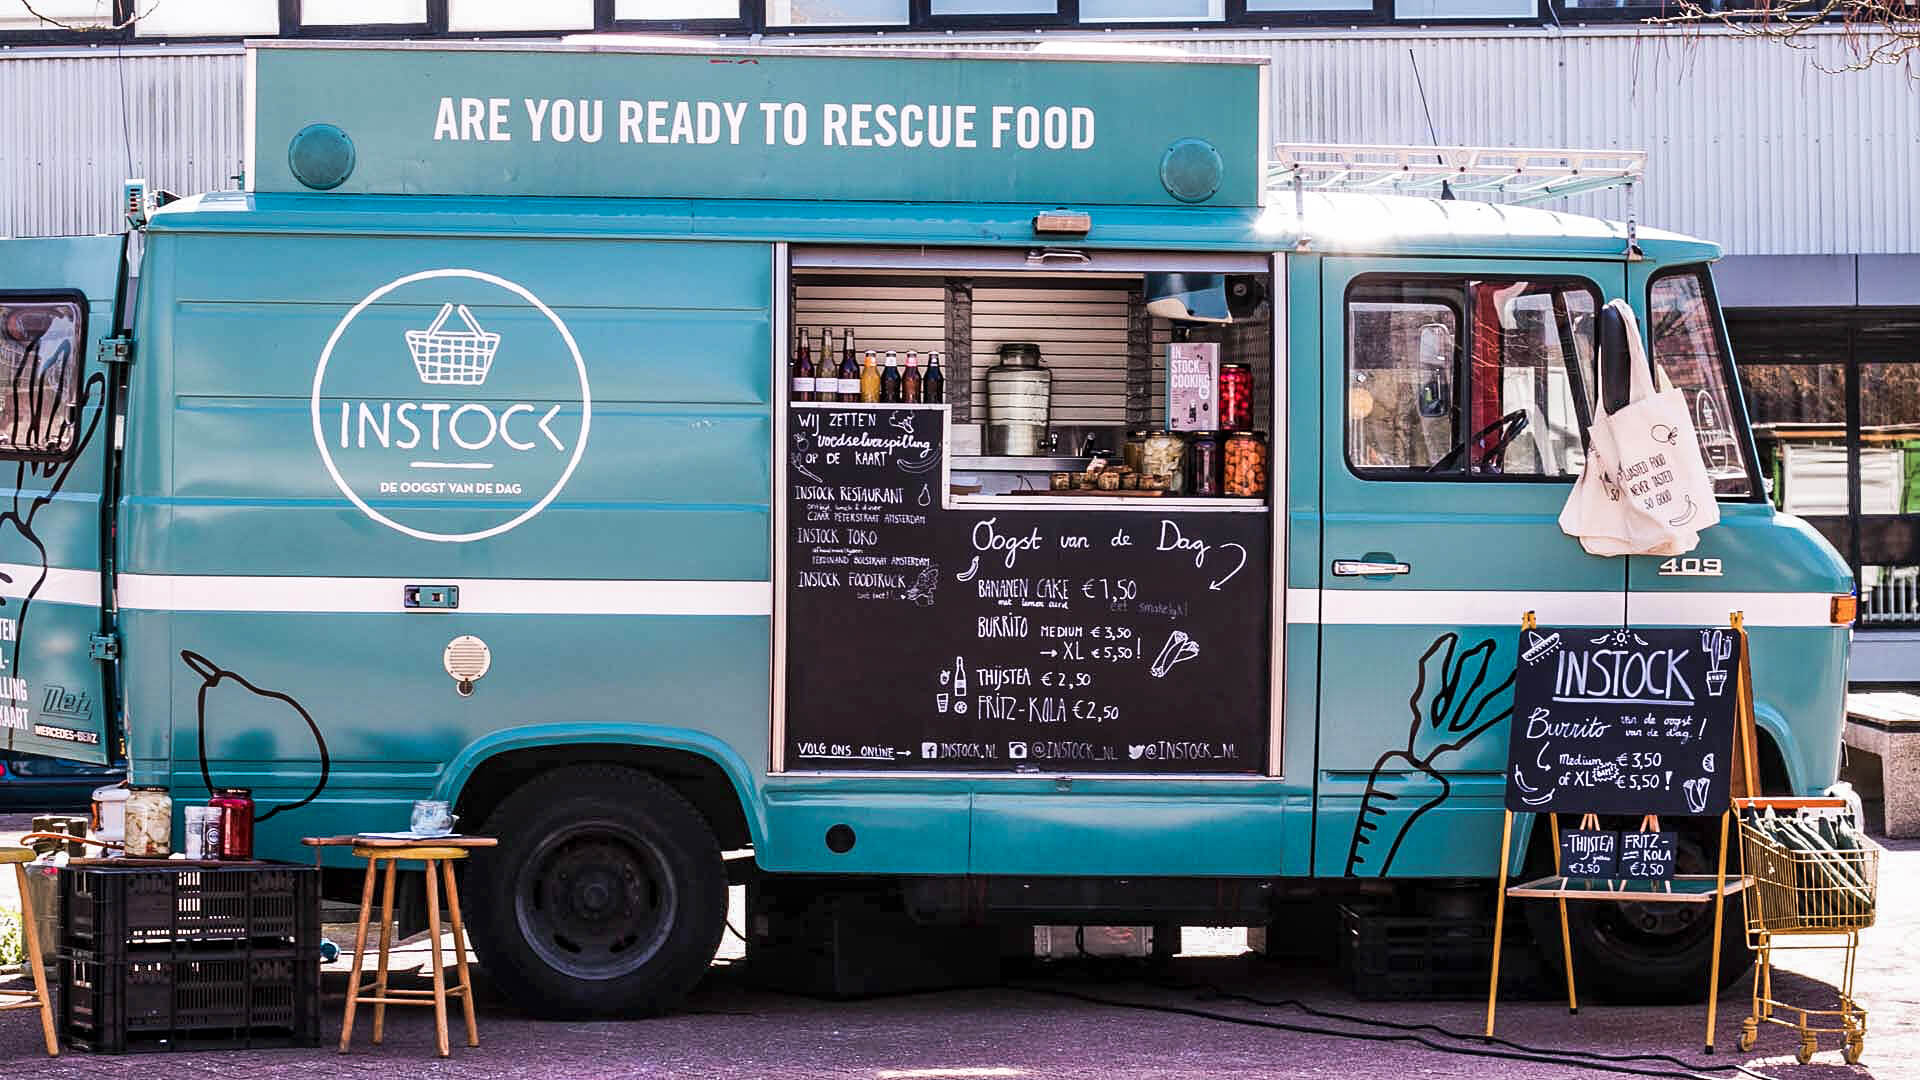 A pop-up restaurant and food truck bring innovation to customers in new ways